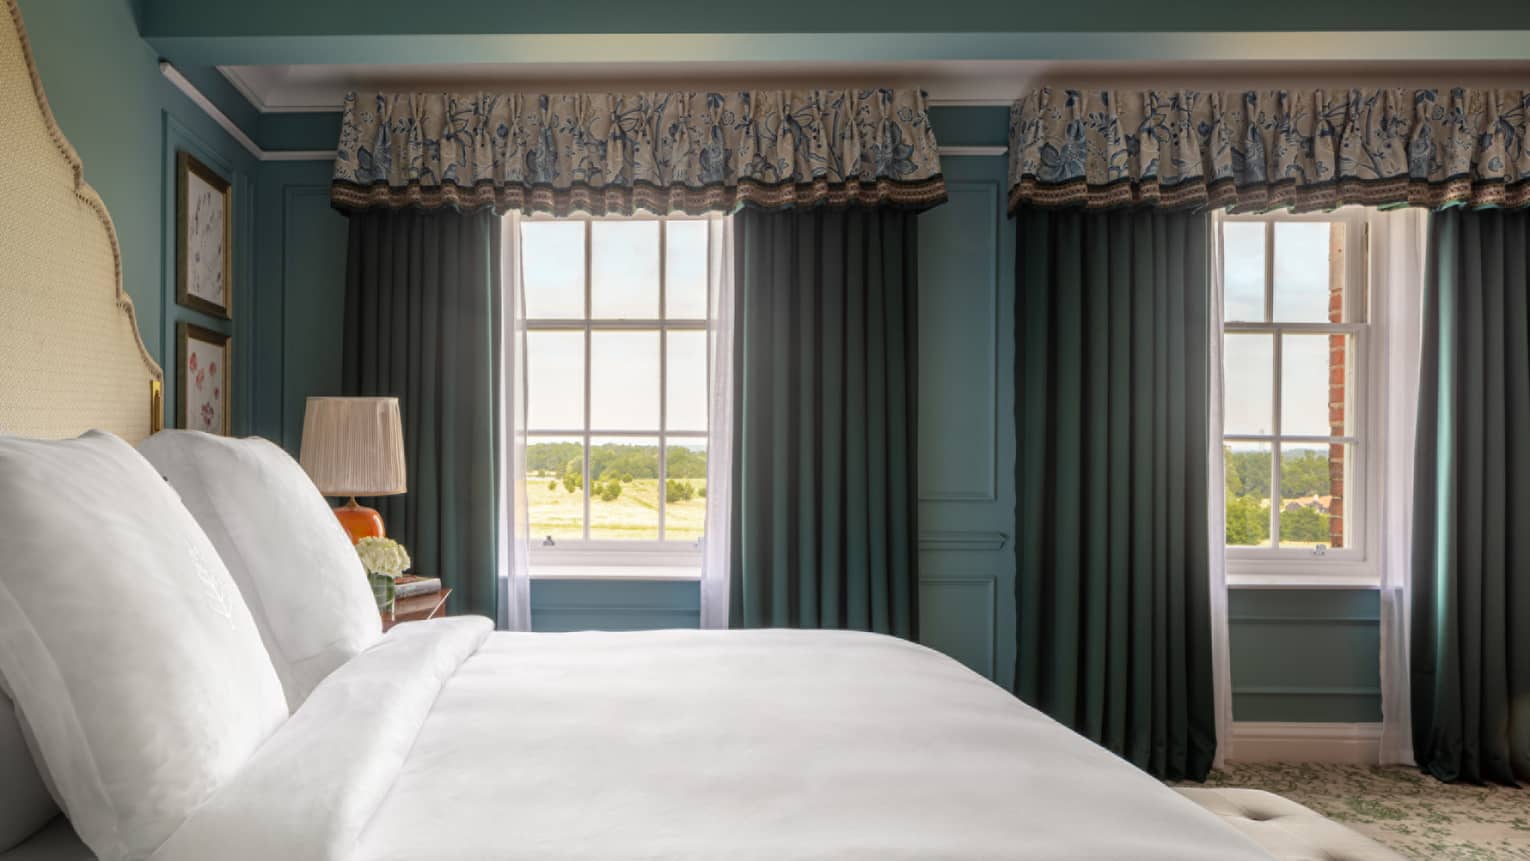 Guest room with bed with white linens, cream headboard and matching bench at foot of bed, twin windows with blue drapes